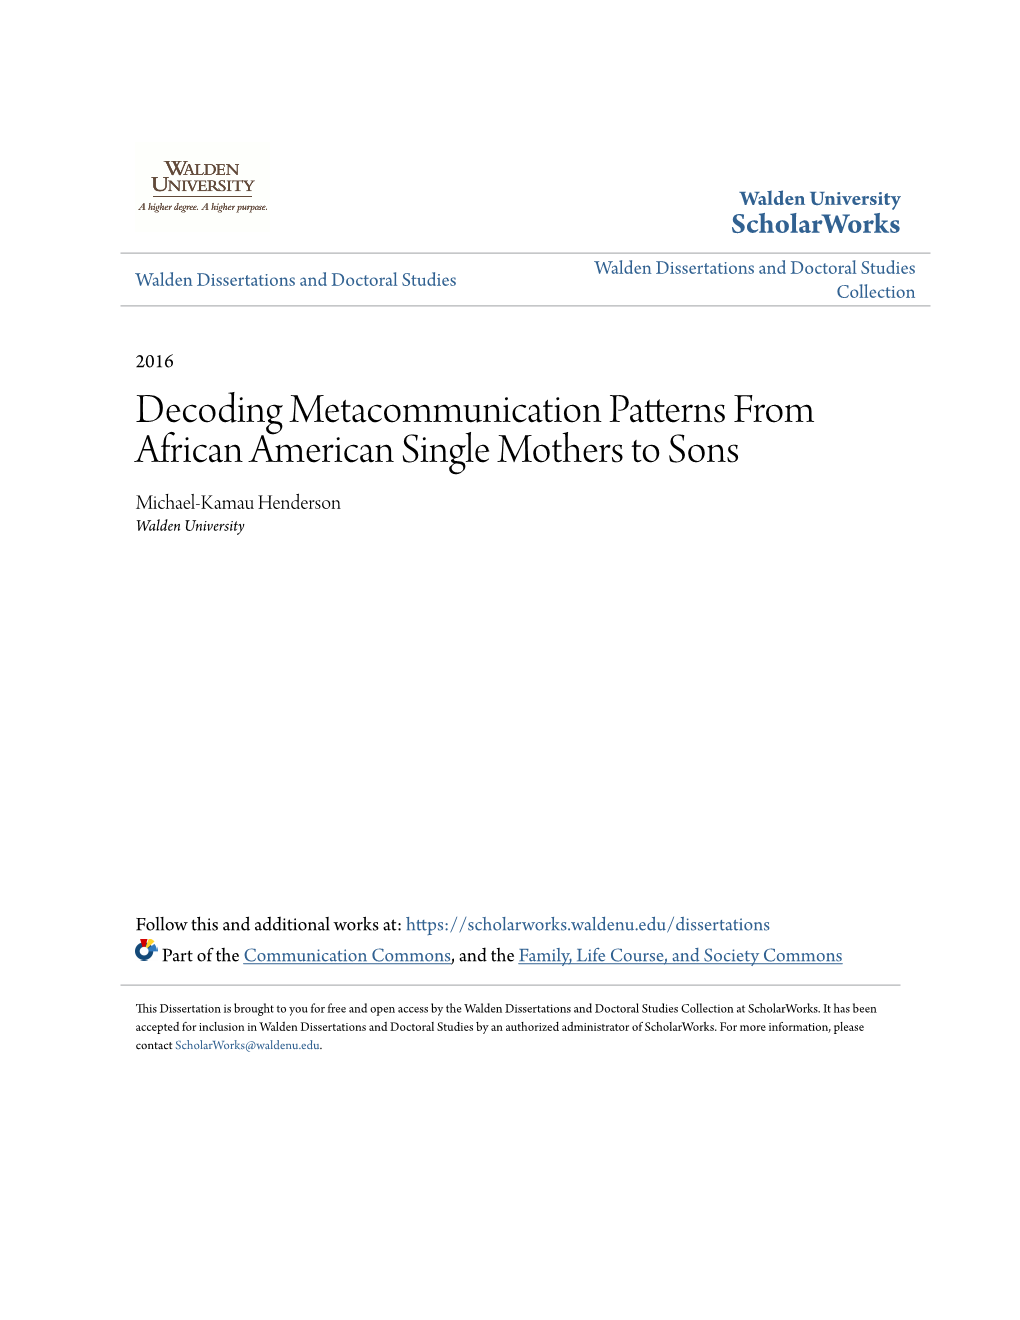 Decoding Metacommunication Patterns from African American Single Mothers to Sons Michael-Kamau Henderson Walden University